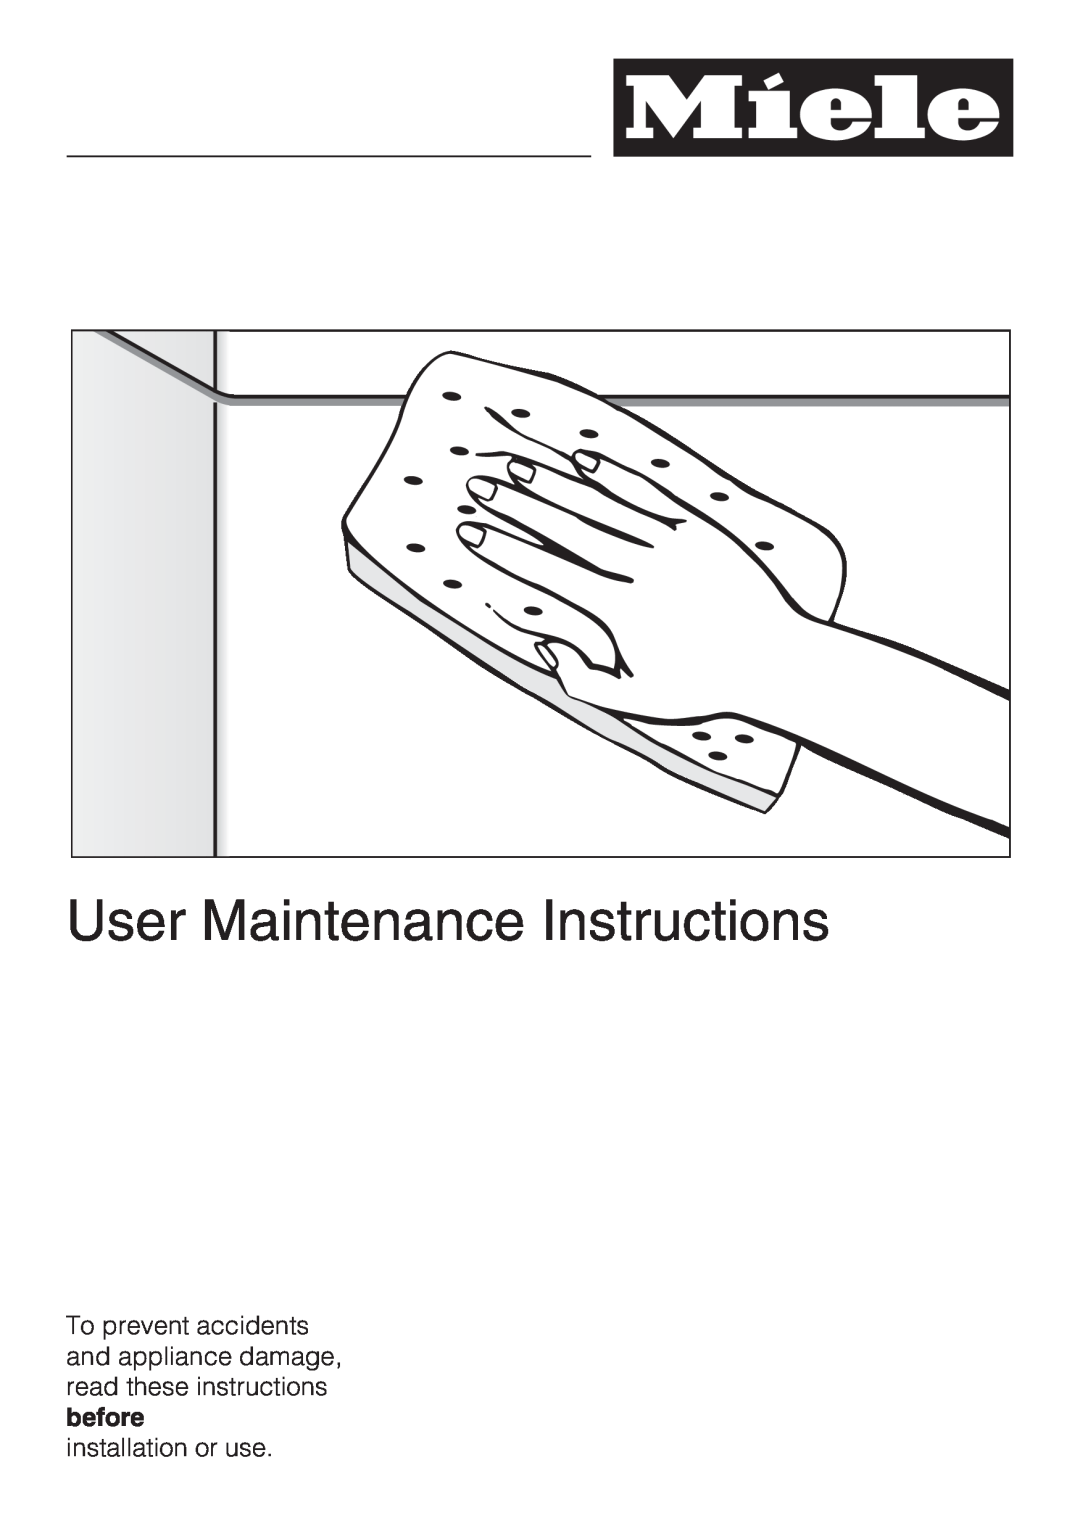 Miele G 4205 operating instructions User Maintenance Instructions, installation or use 